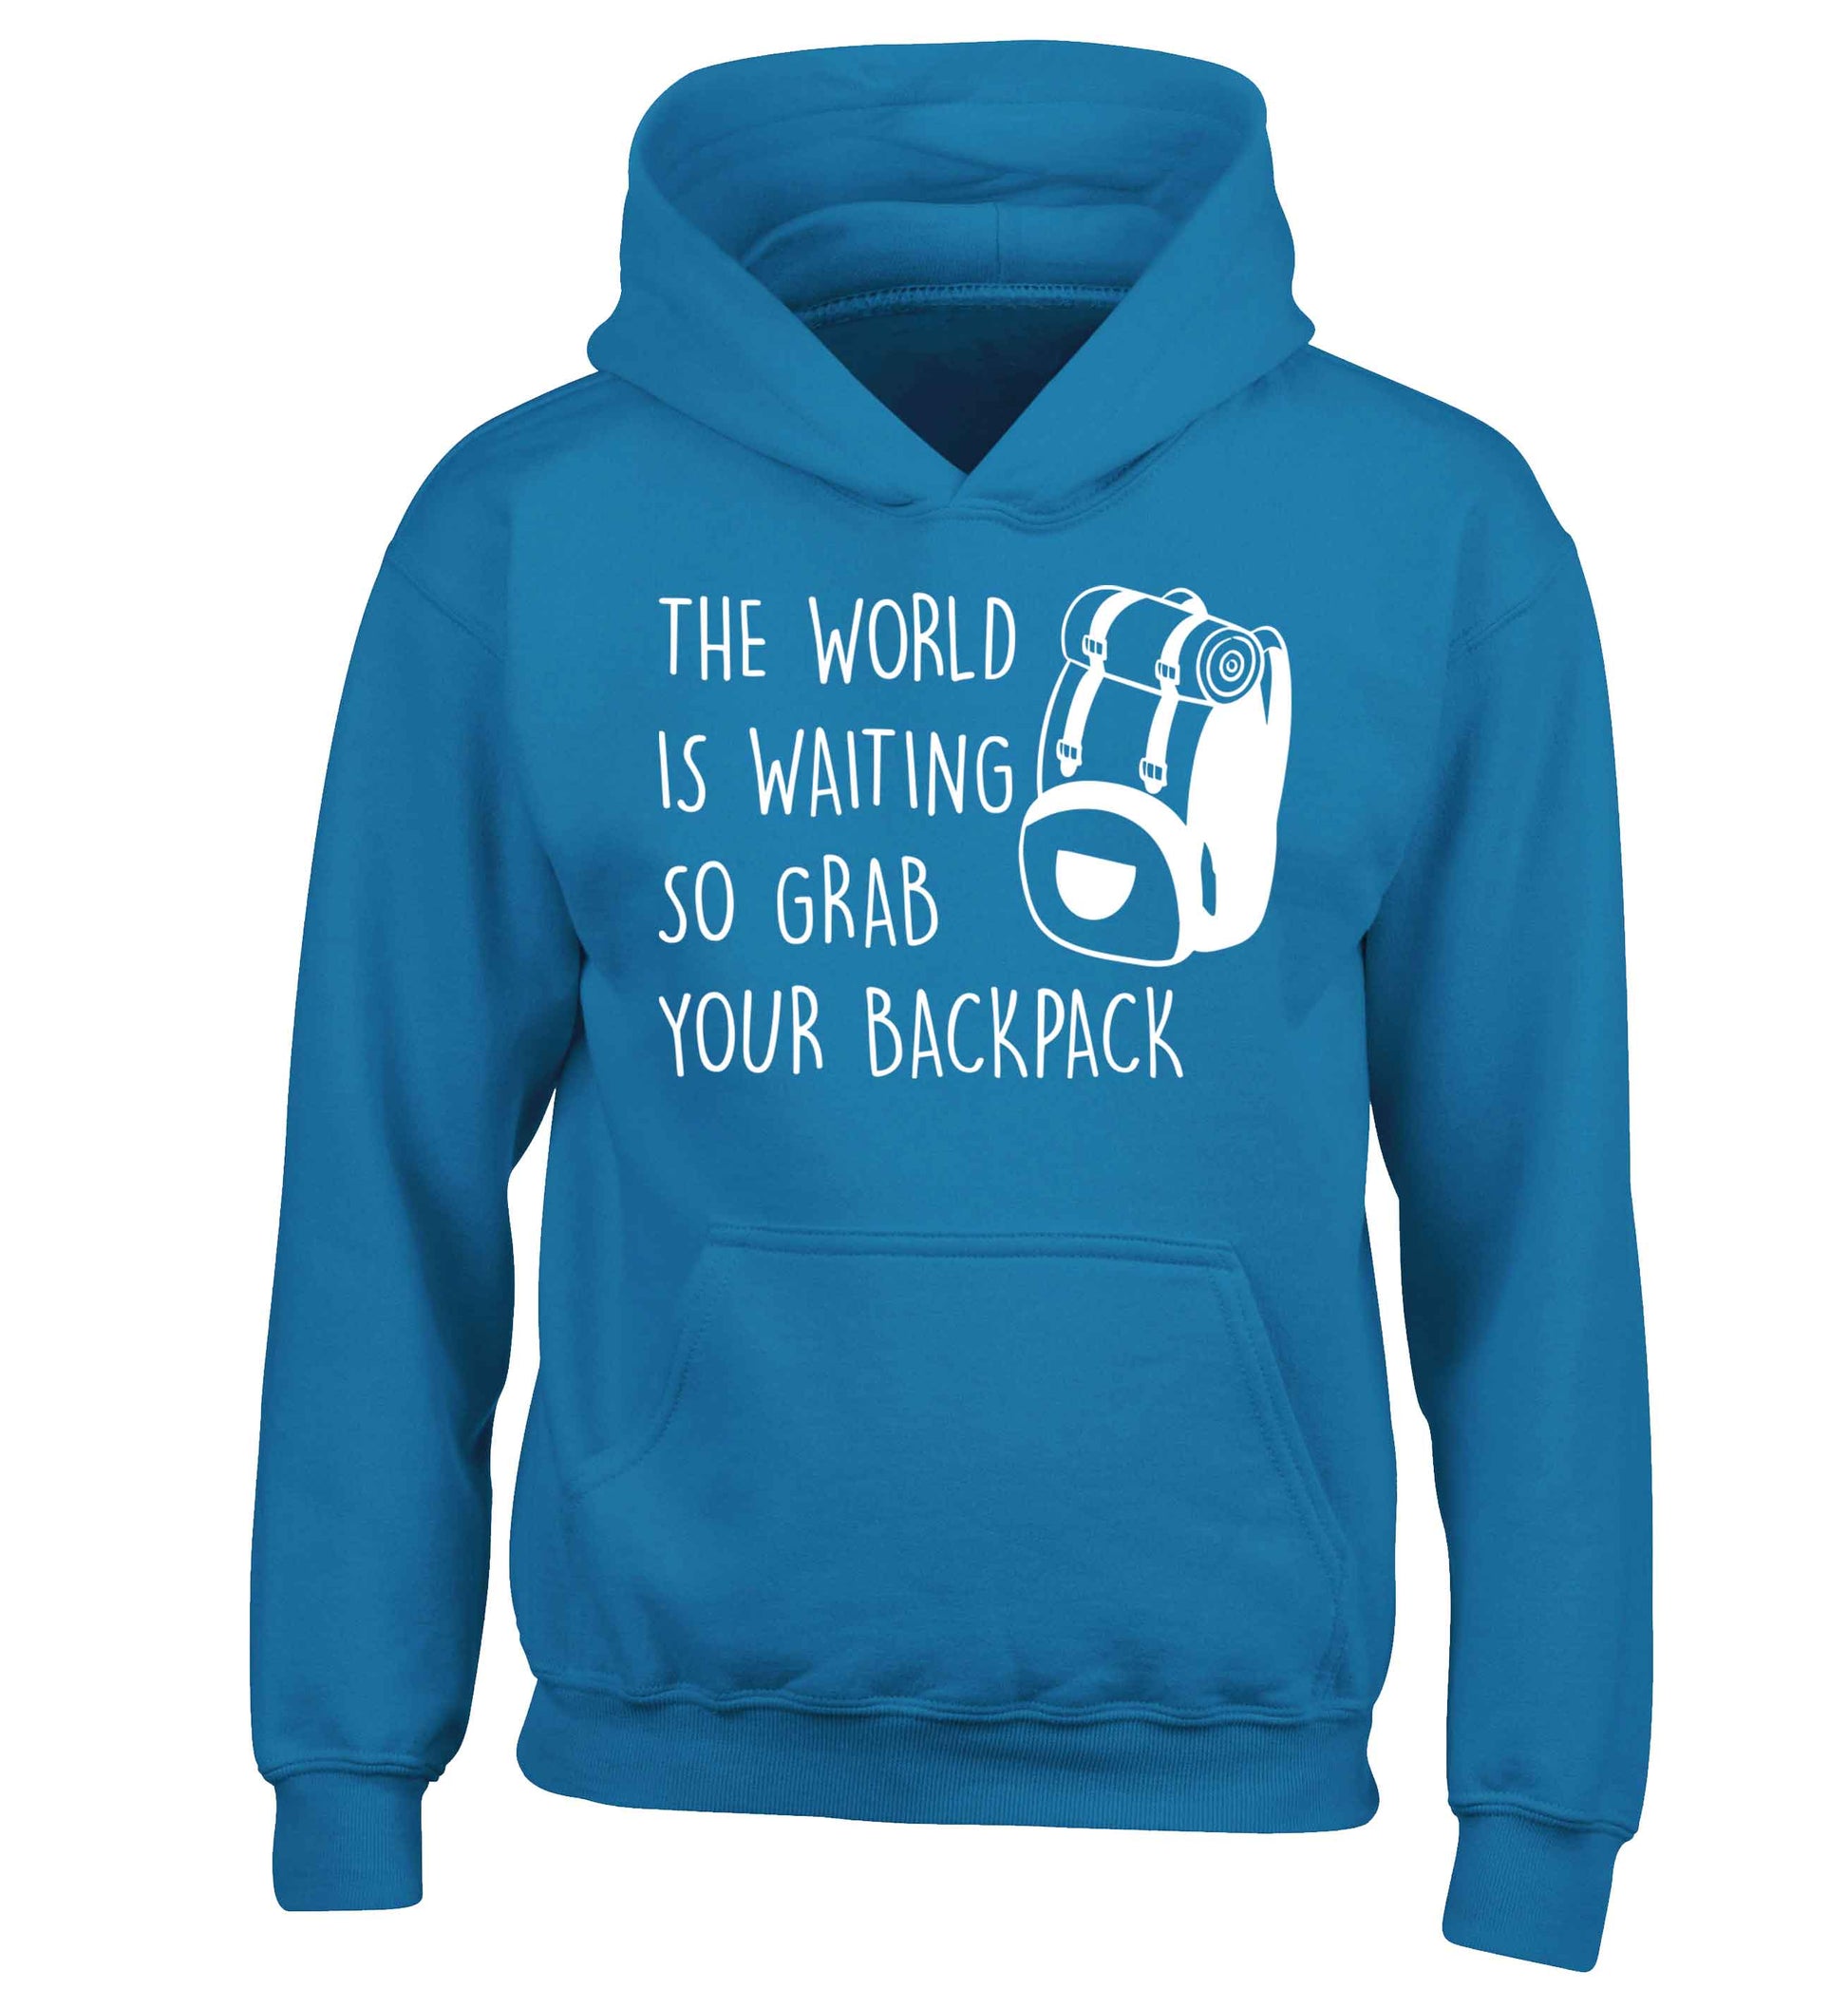 The world is waiting so grab your backpack children's blue hoodie 12-13 Years